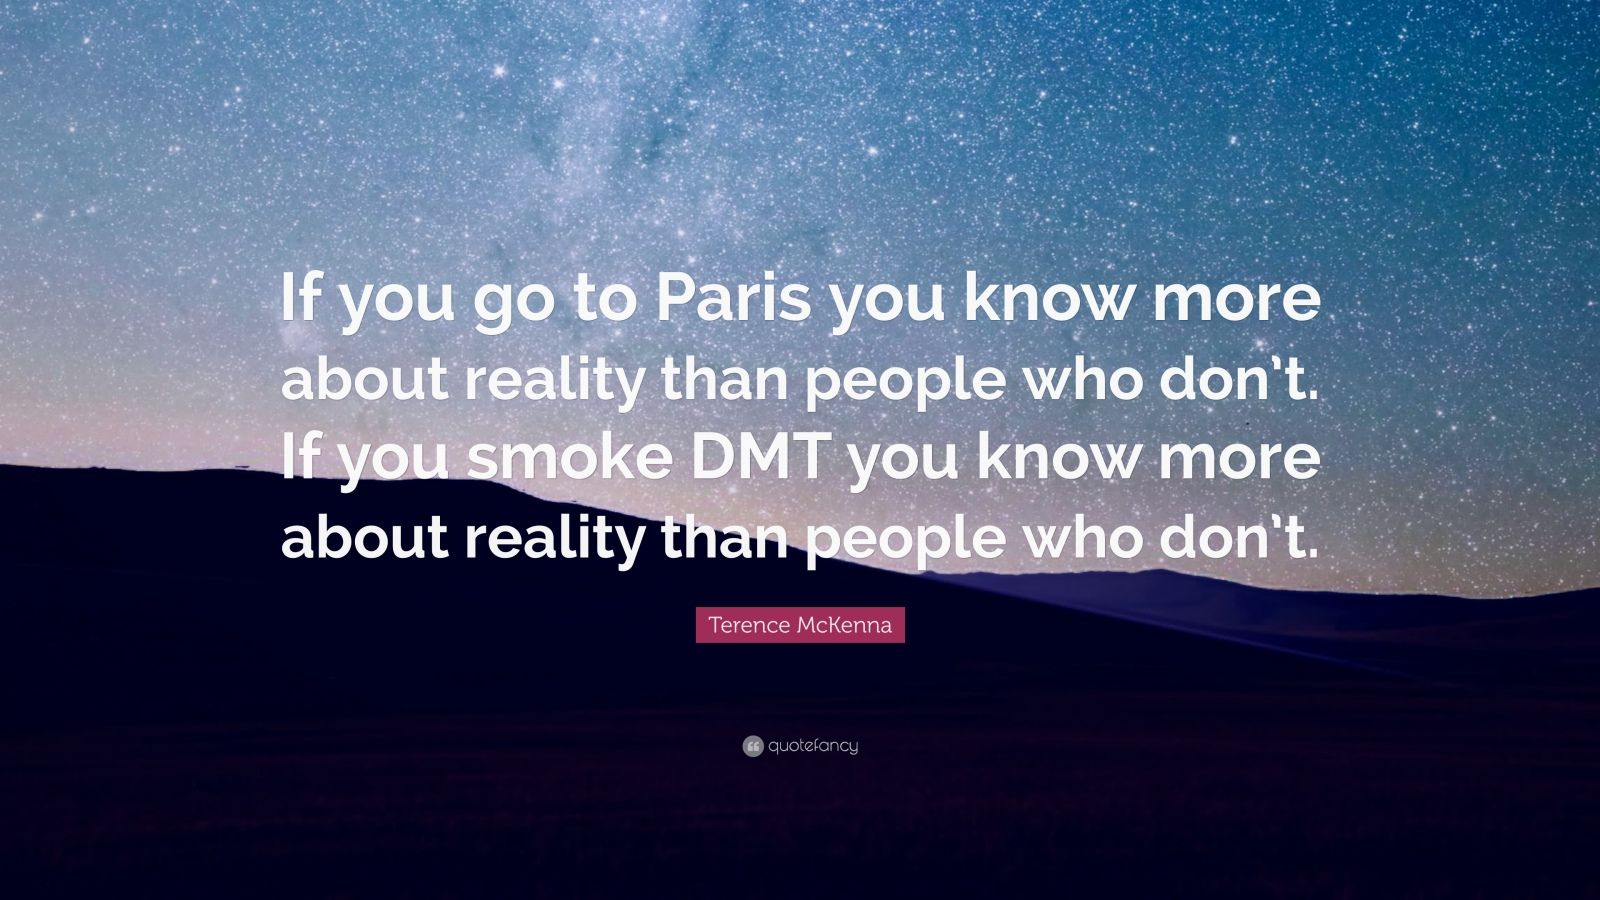 Terence McKenna Quote: “If you go to Paris you know more about reality ...